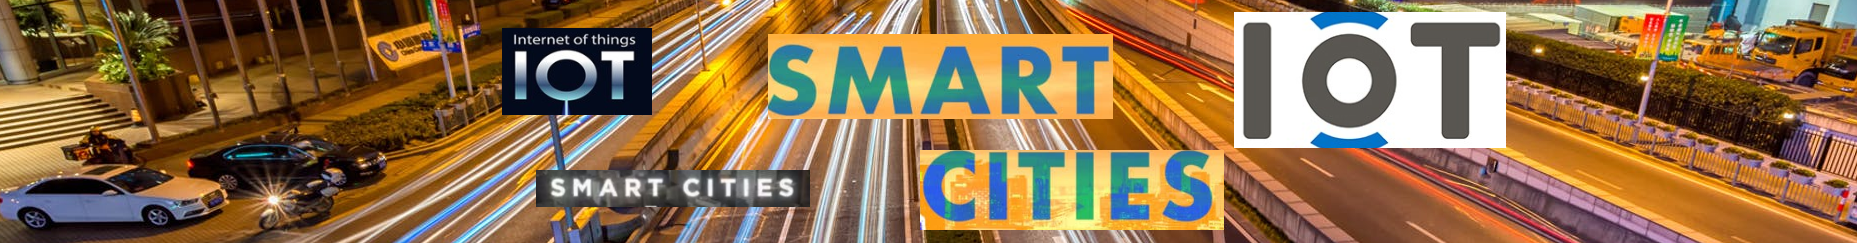 IoT and smart city